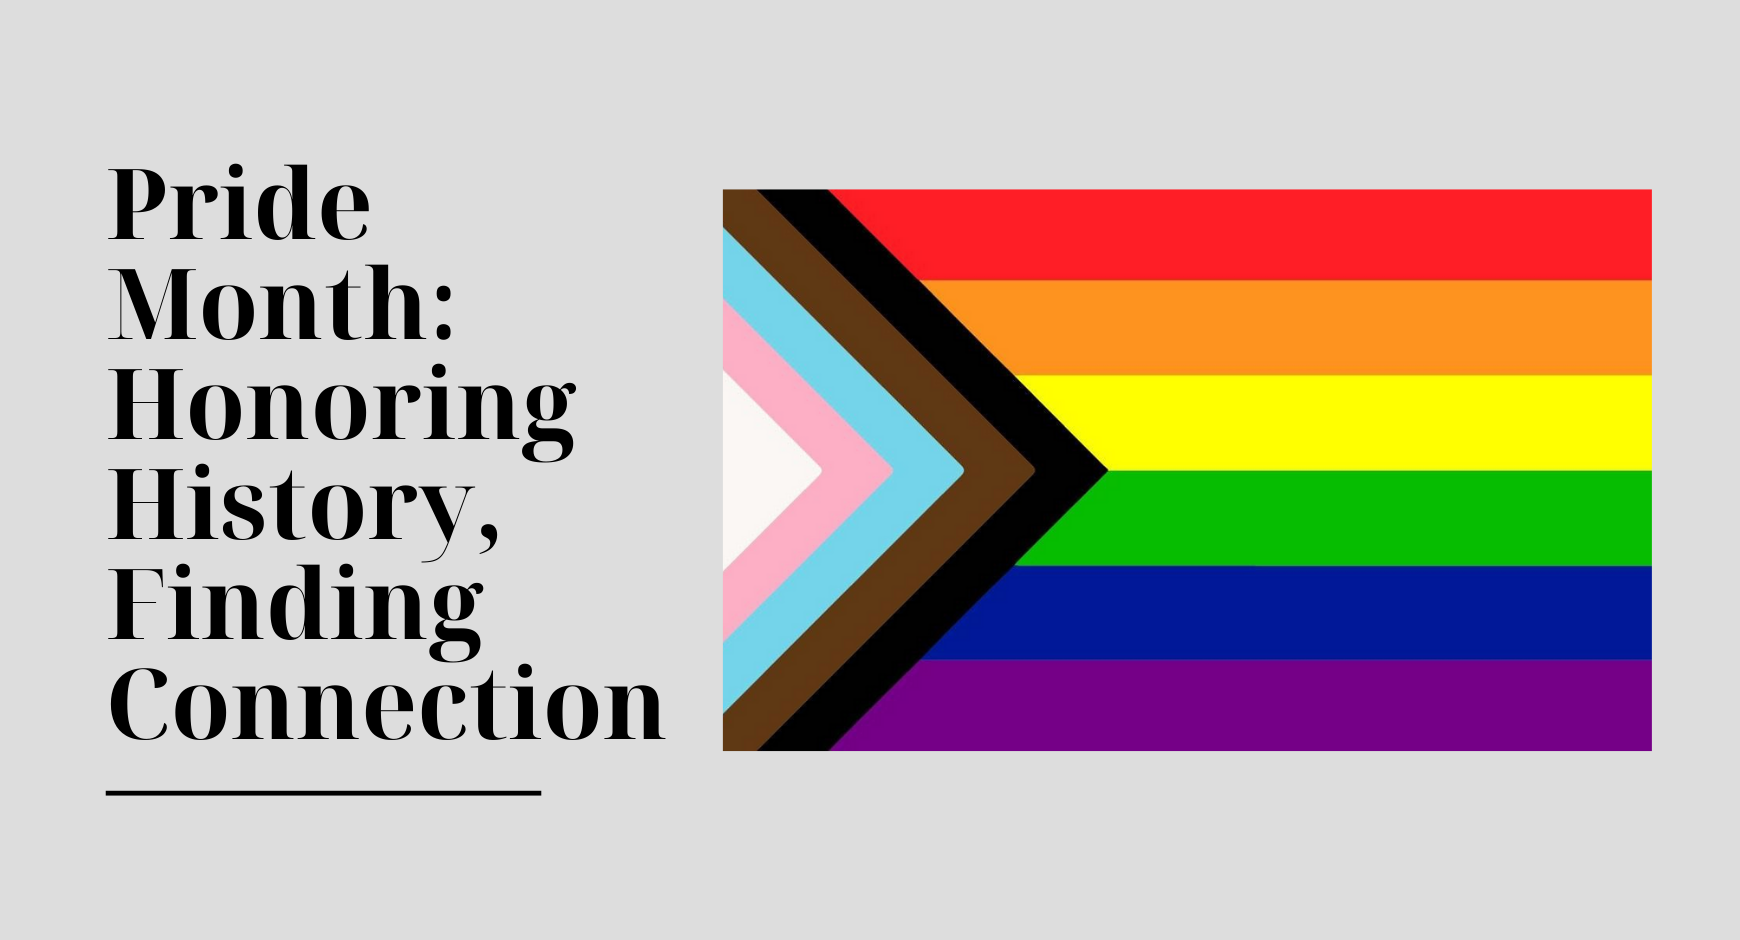 The Progress Pride flag next to text that reads "Pride Month: Honoring History, Finding Connection"